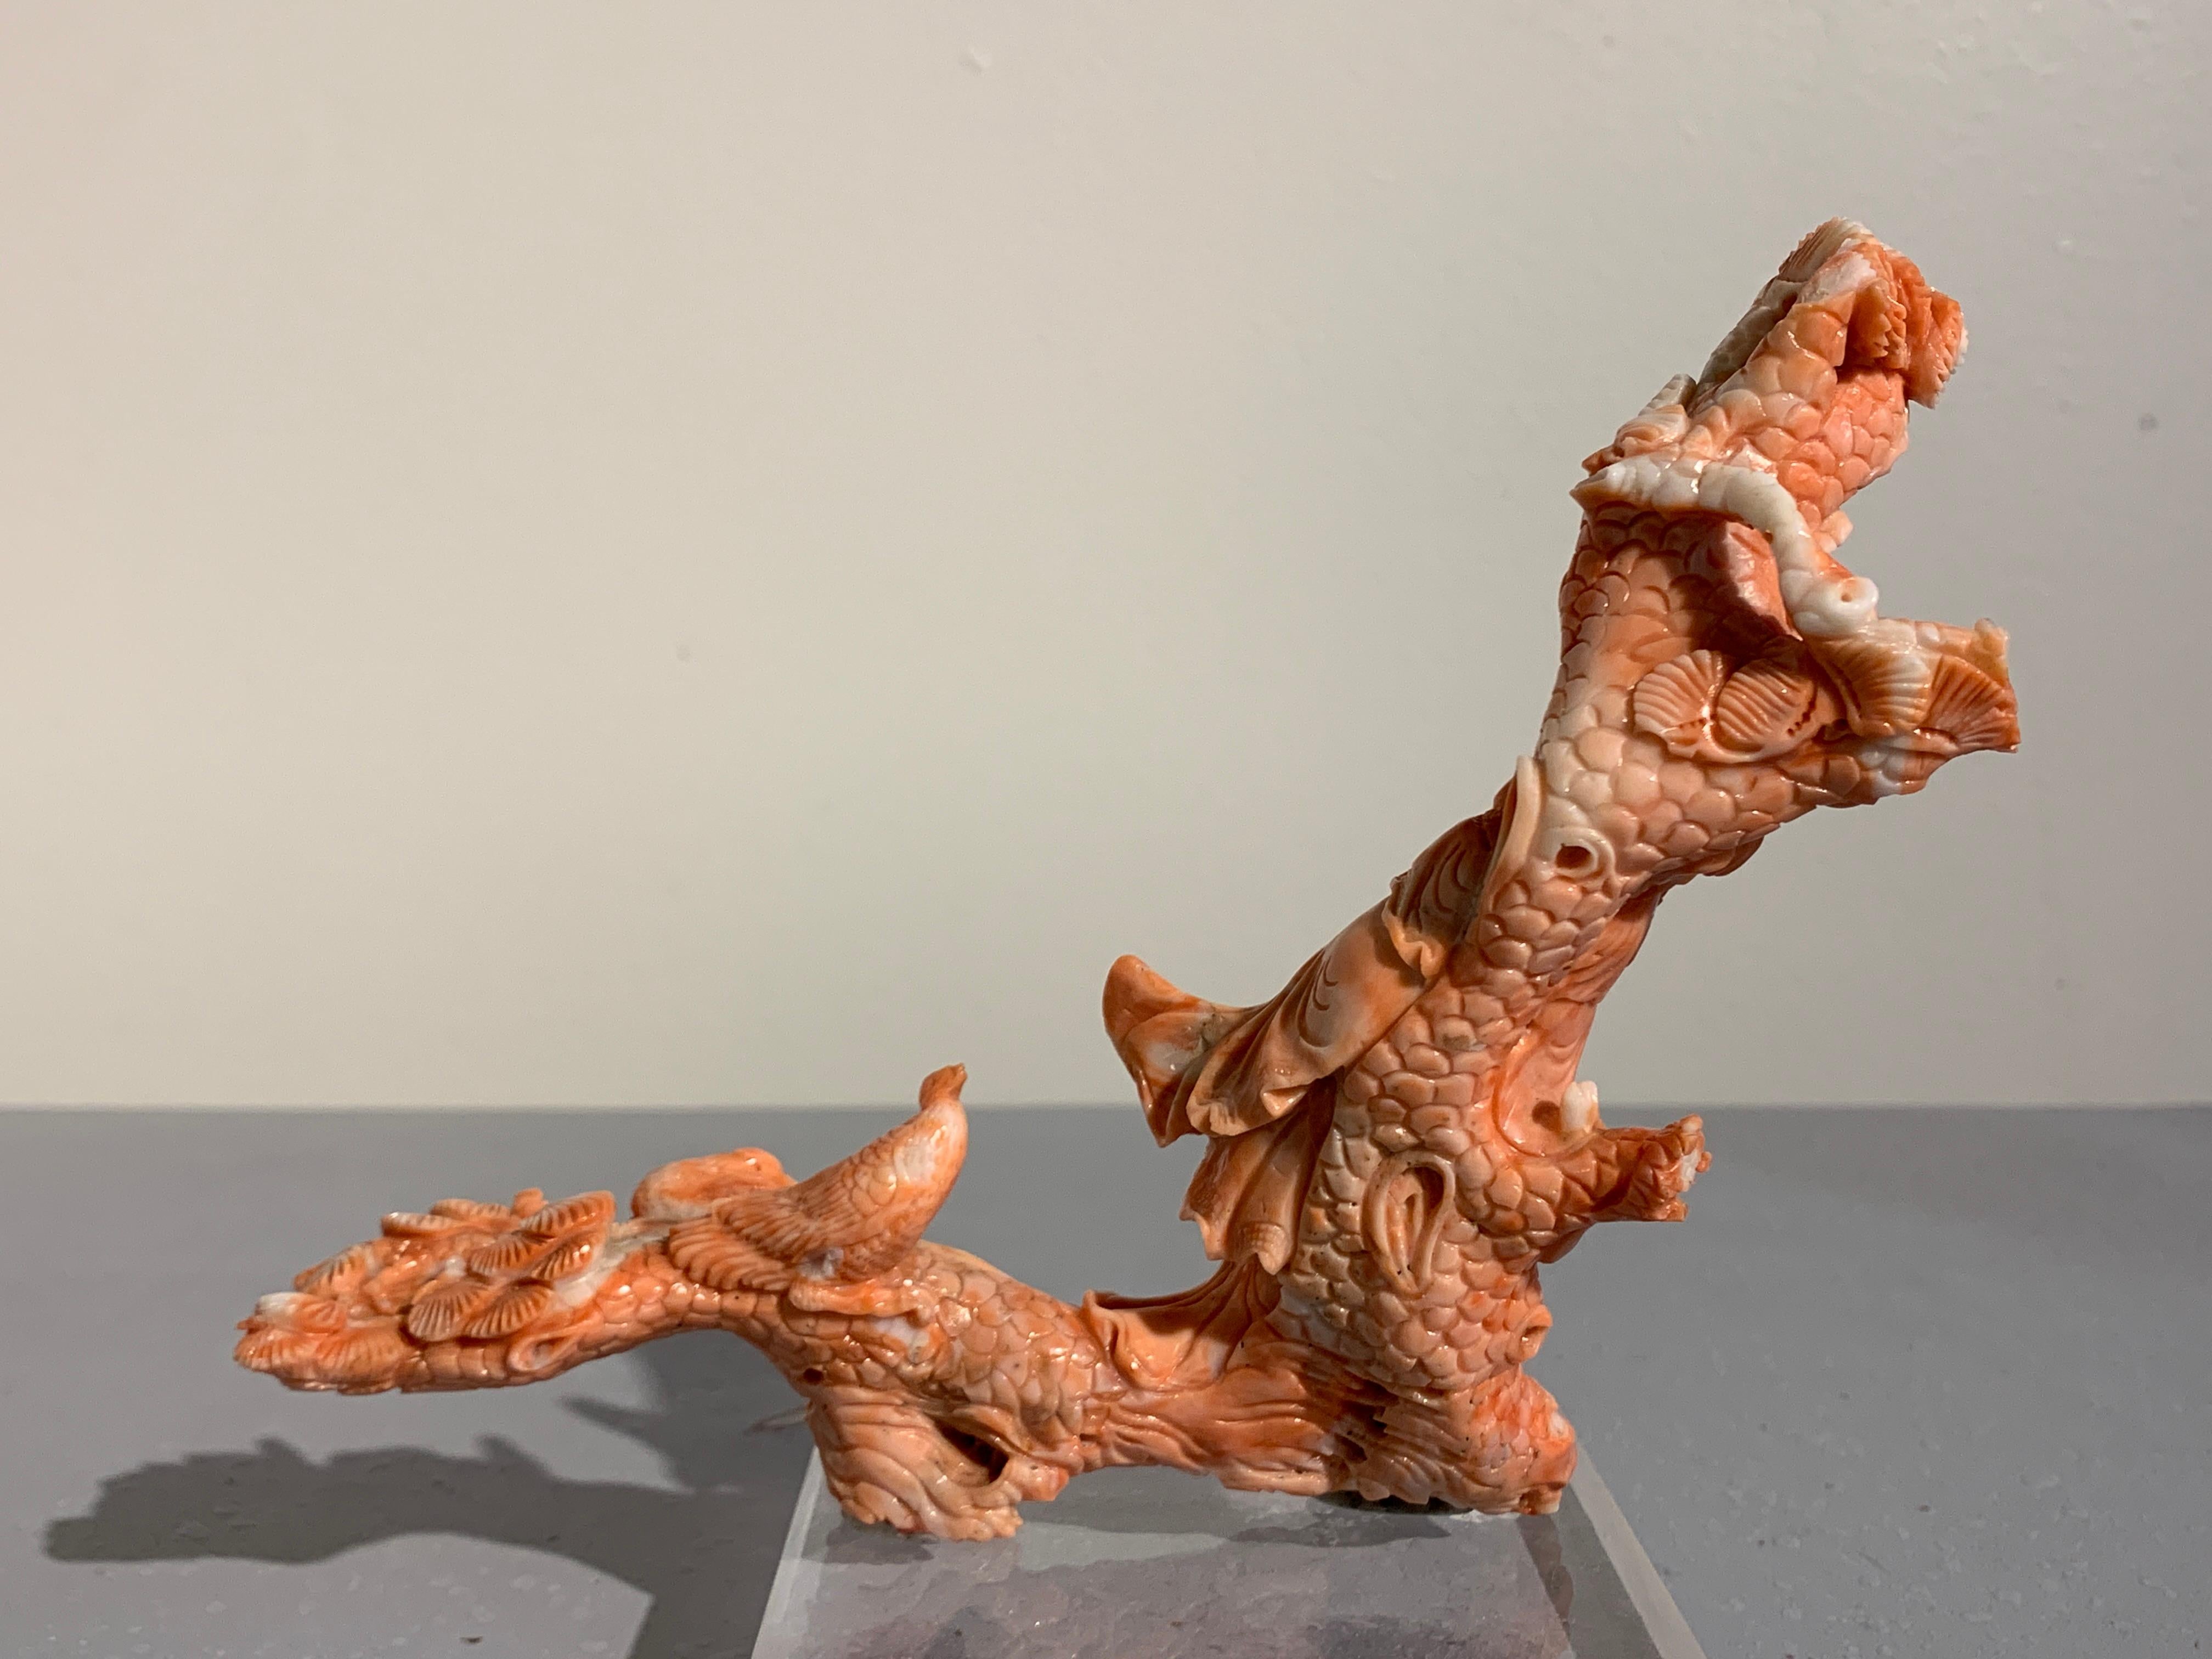 A wonderfully Chinese carved coral branch in the form of Shou Lao, also called Shouxing, the Chinese god of longevity, Republic period, early 20th century.

Intricately carved from a single large branch of pinkish orange coral, the jovial Shou Lao